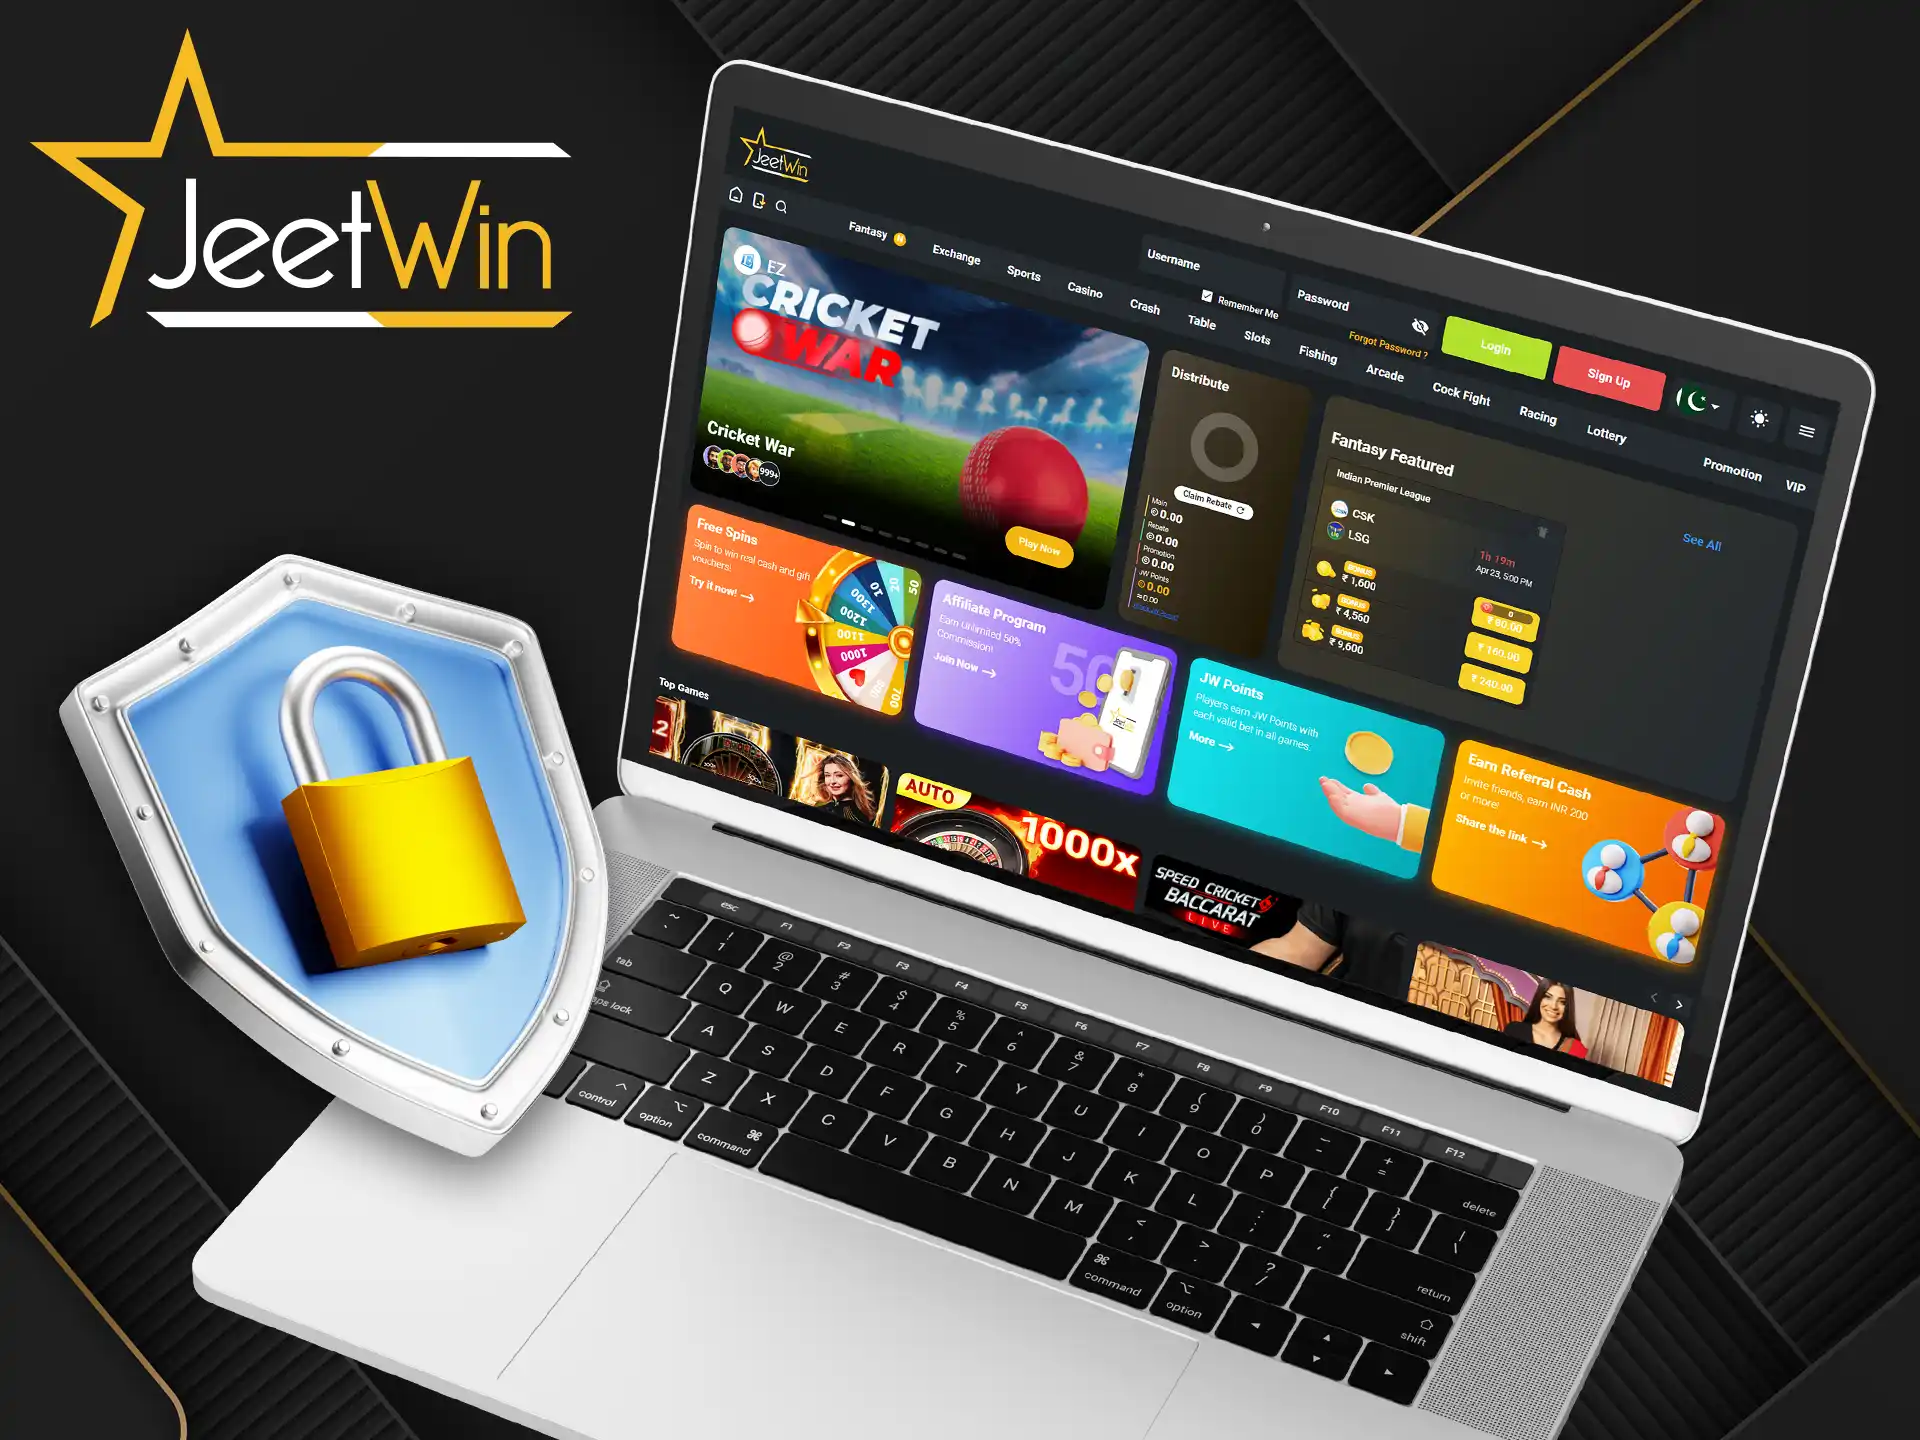 JeetWin provides a high level of user data security.